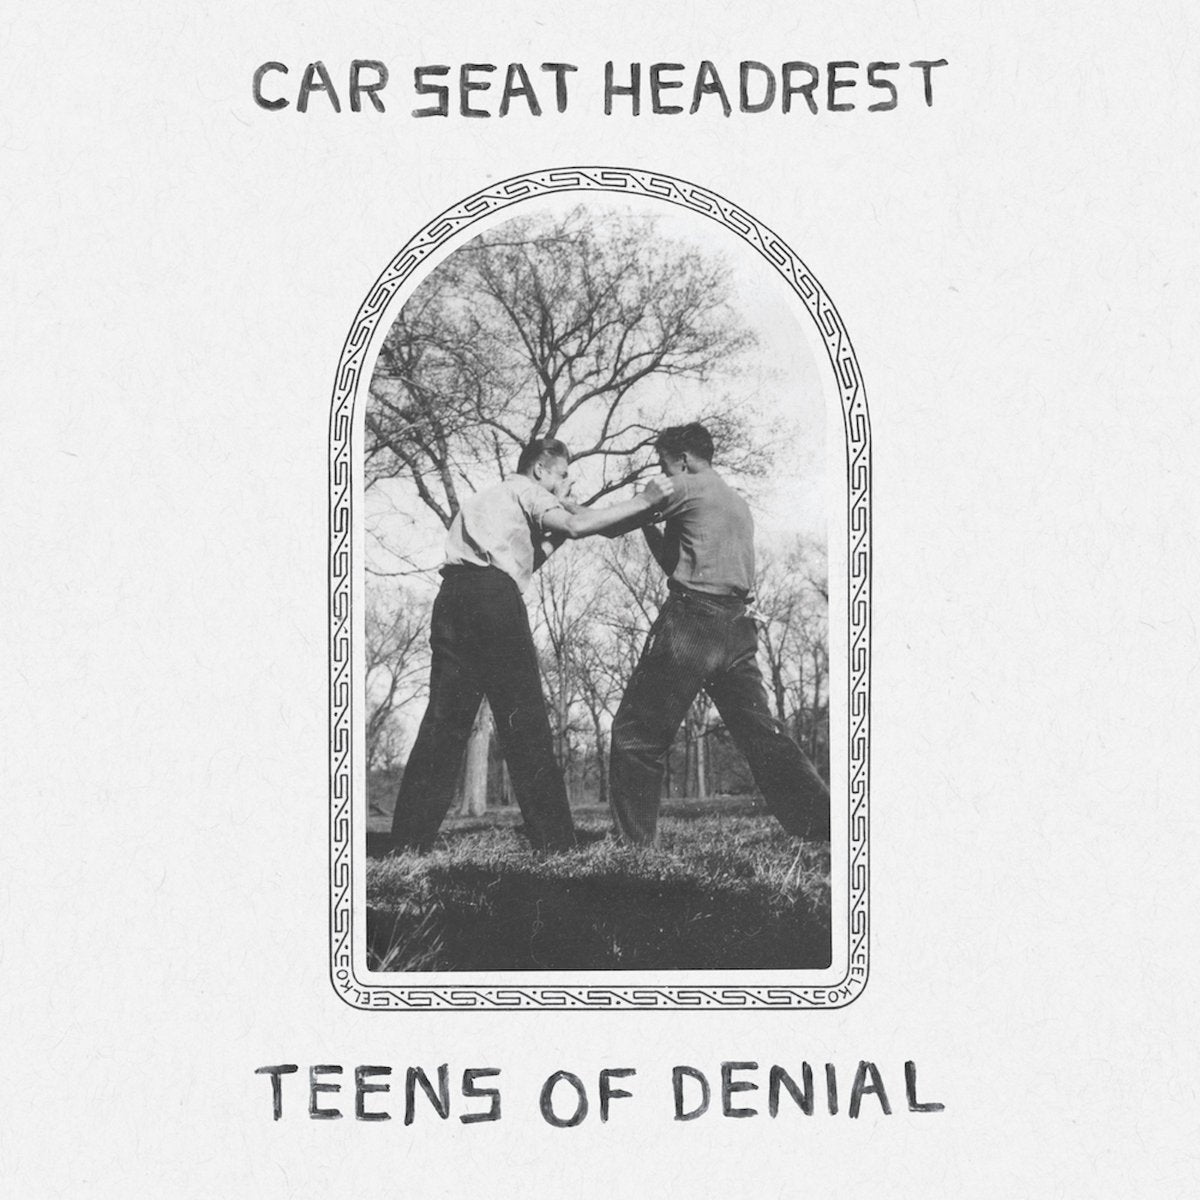 About Our Car Seat Headrest Exclusive